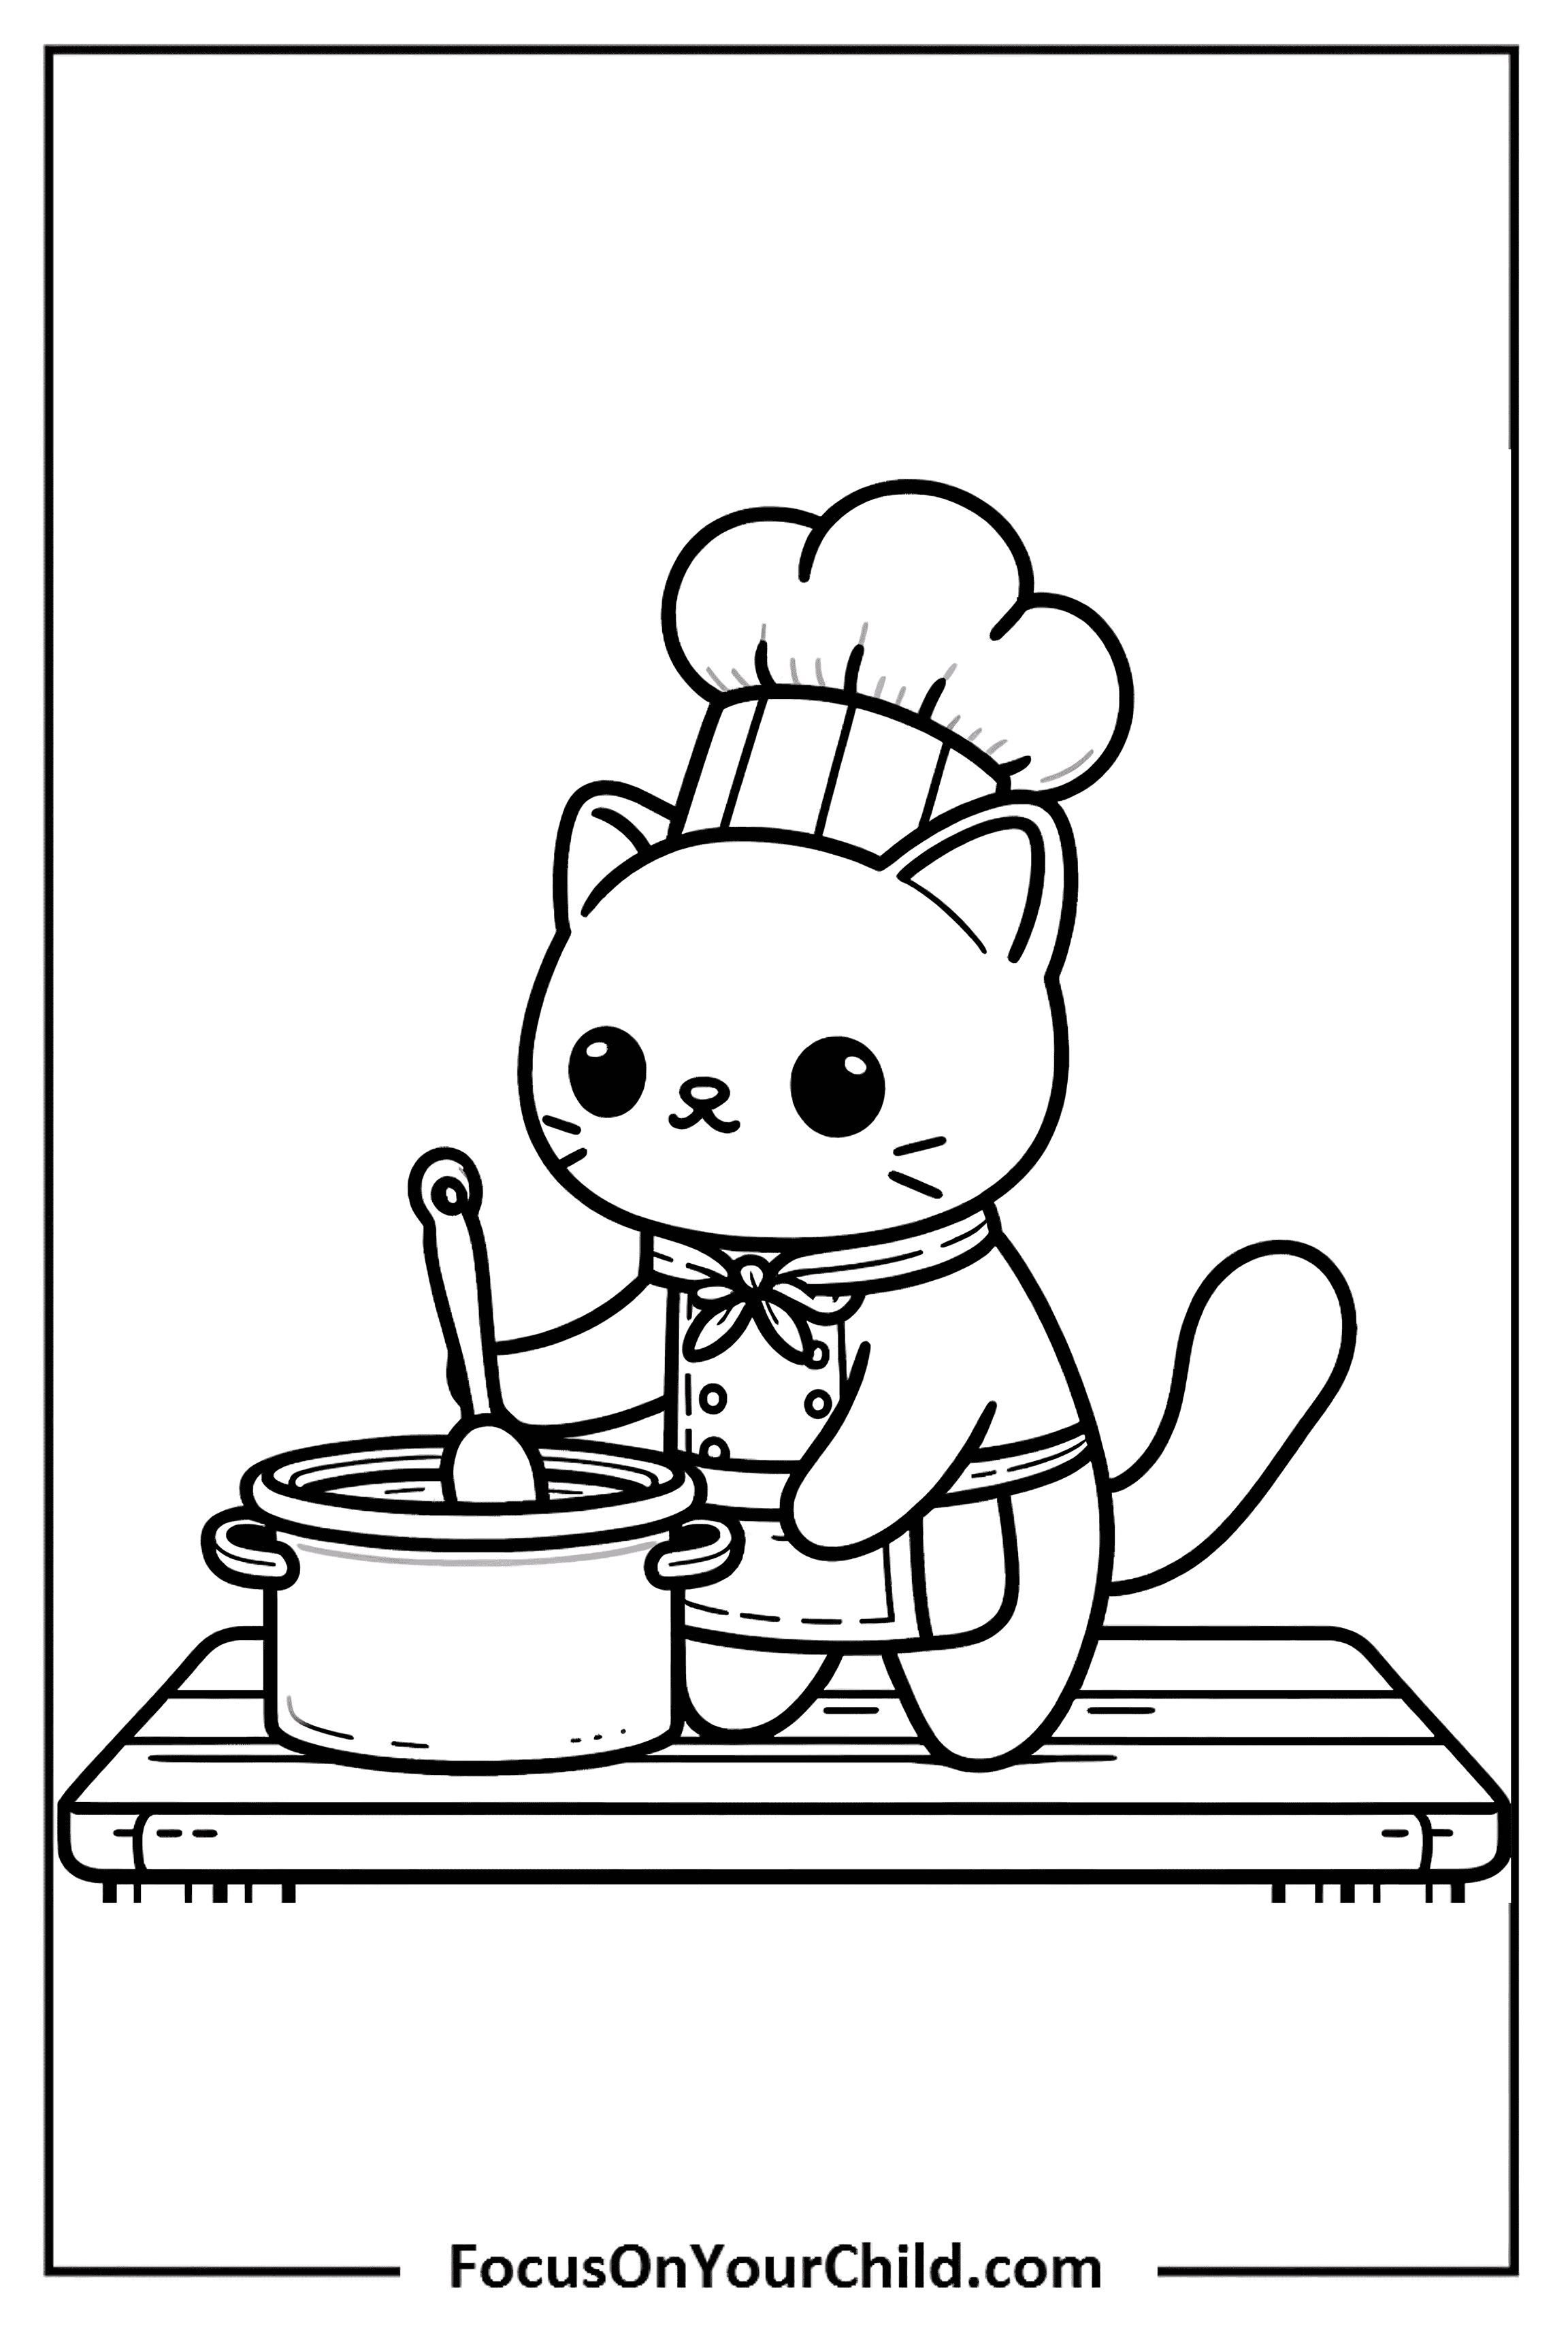 Adorable cat chef stirring food in a pot on a wooden table.